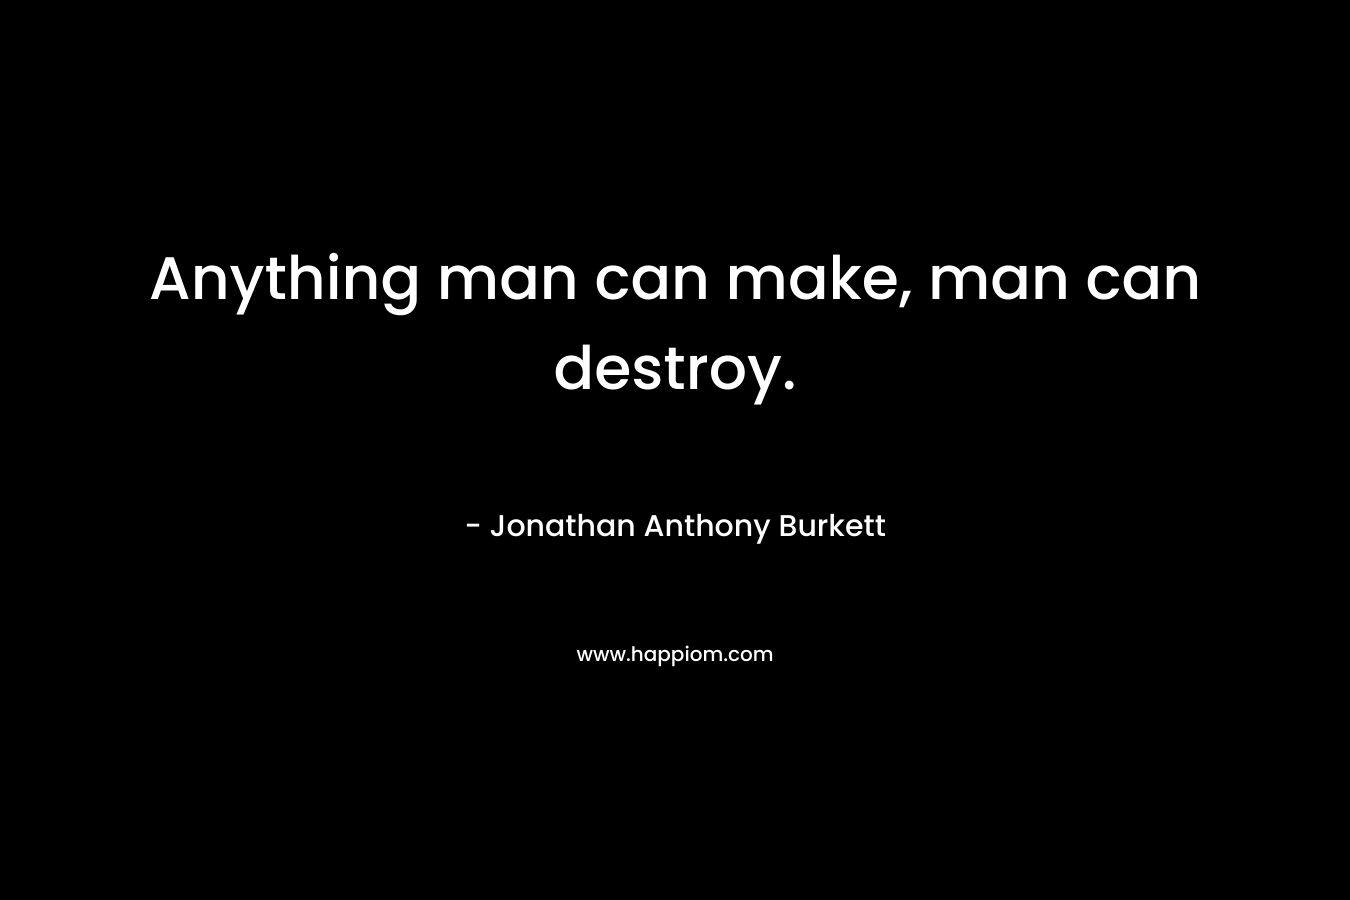 Anything man can make, man can destroy.